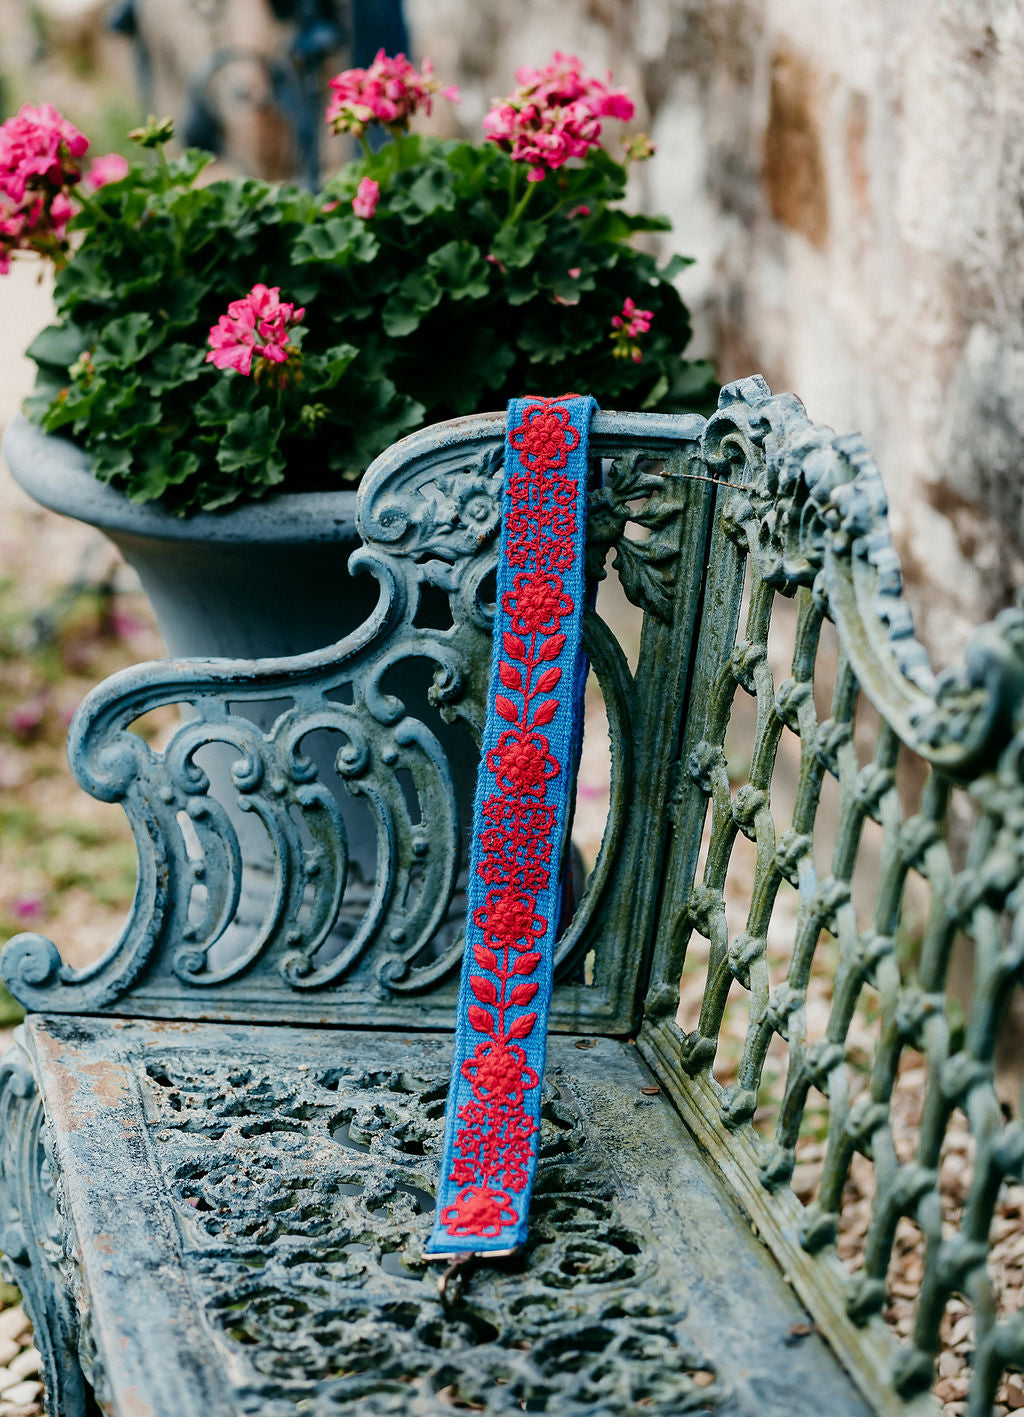 Red and blue purse strap adorned with red floral and leaf embroidery displayed on a bench.